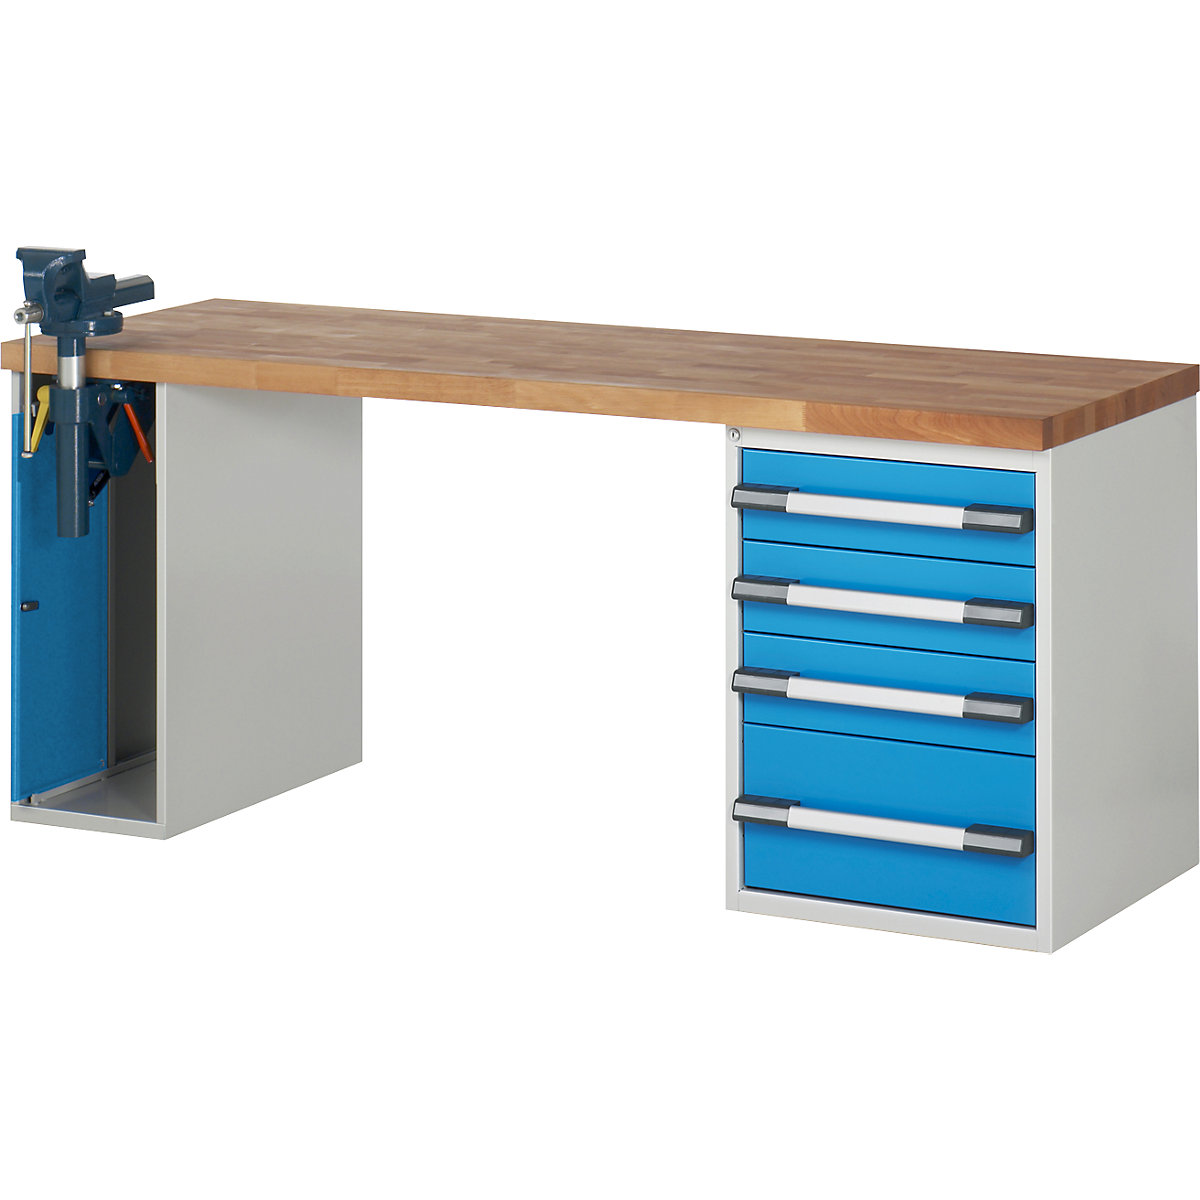 Workbench, Series 7 modular system – eurokraft pro, 1 cupboard, 1 fixed pedestal with 4 drawers, WxD 2000 x 700 mm-7